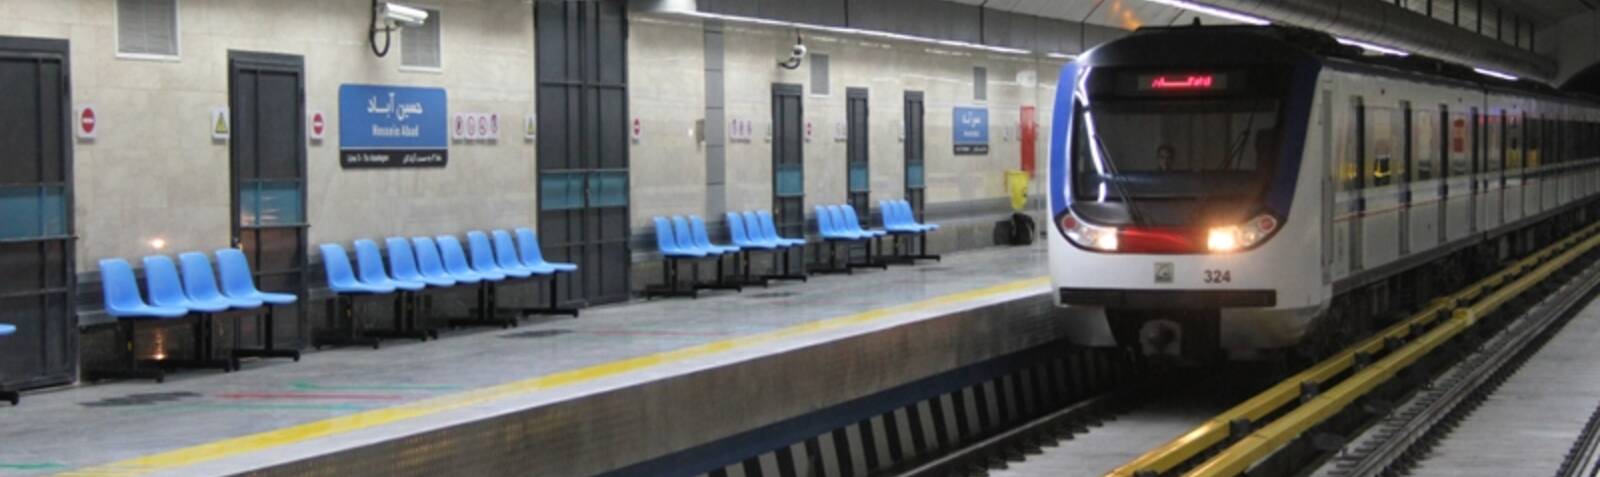 How to Use Metro in Tehran